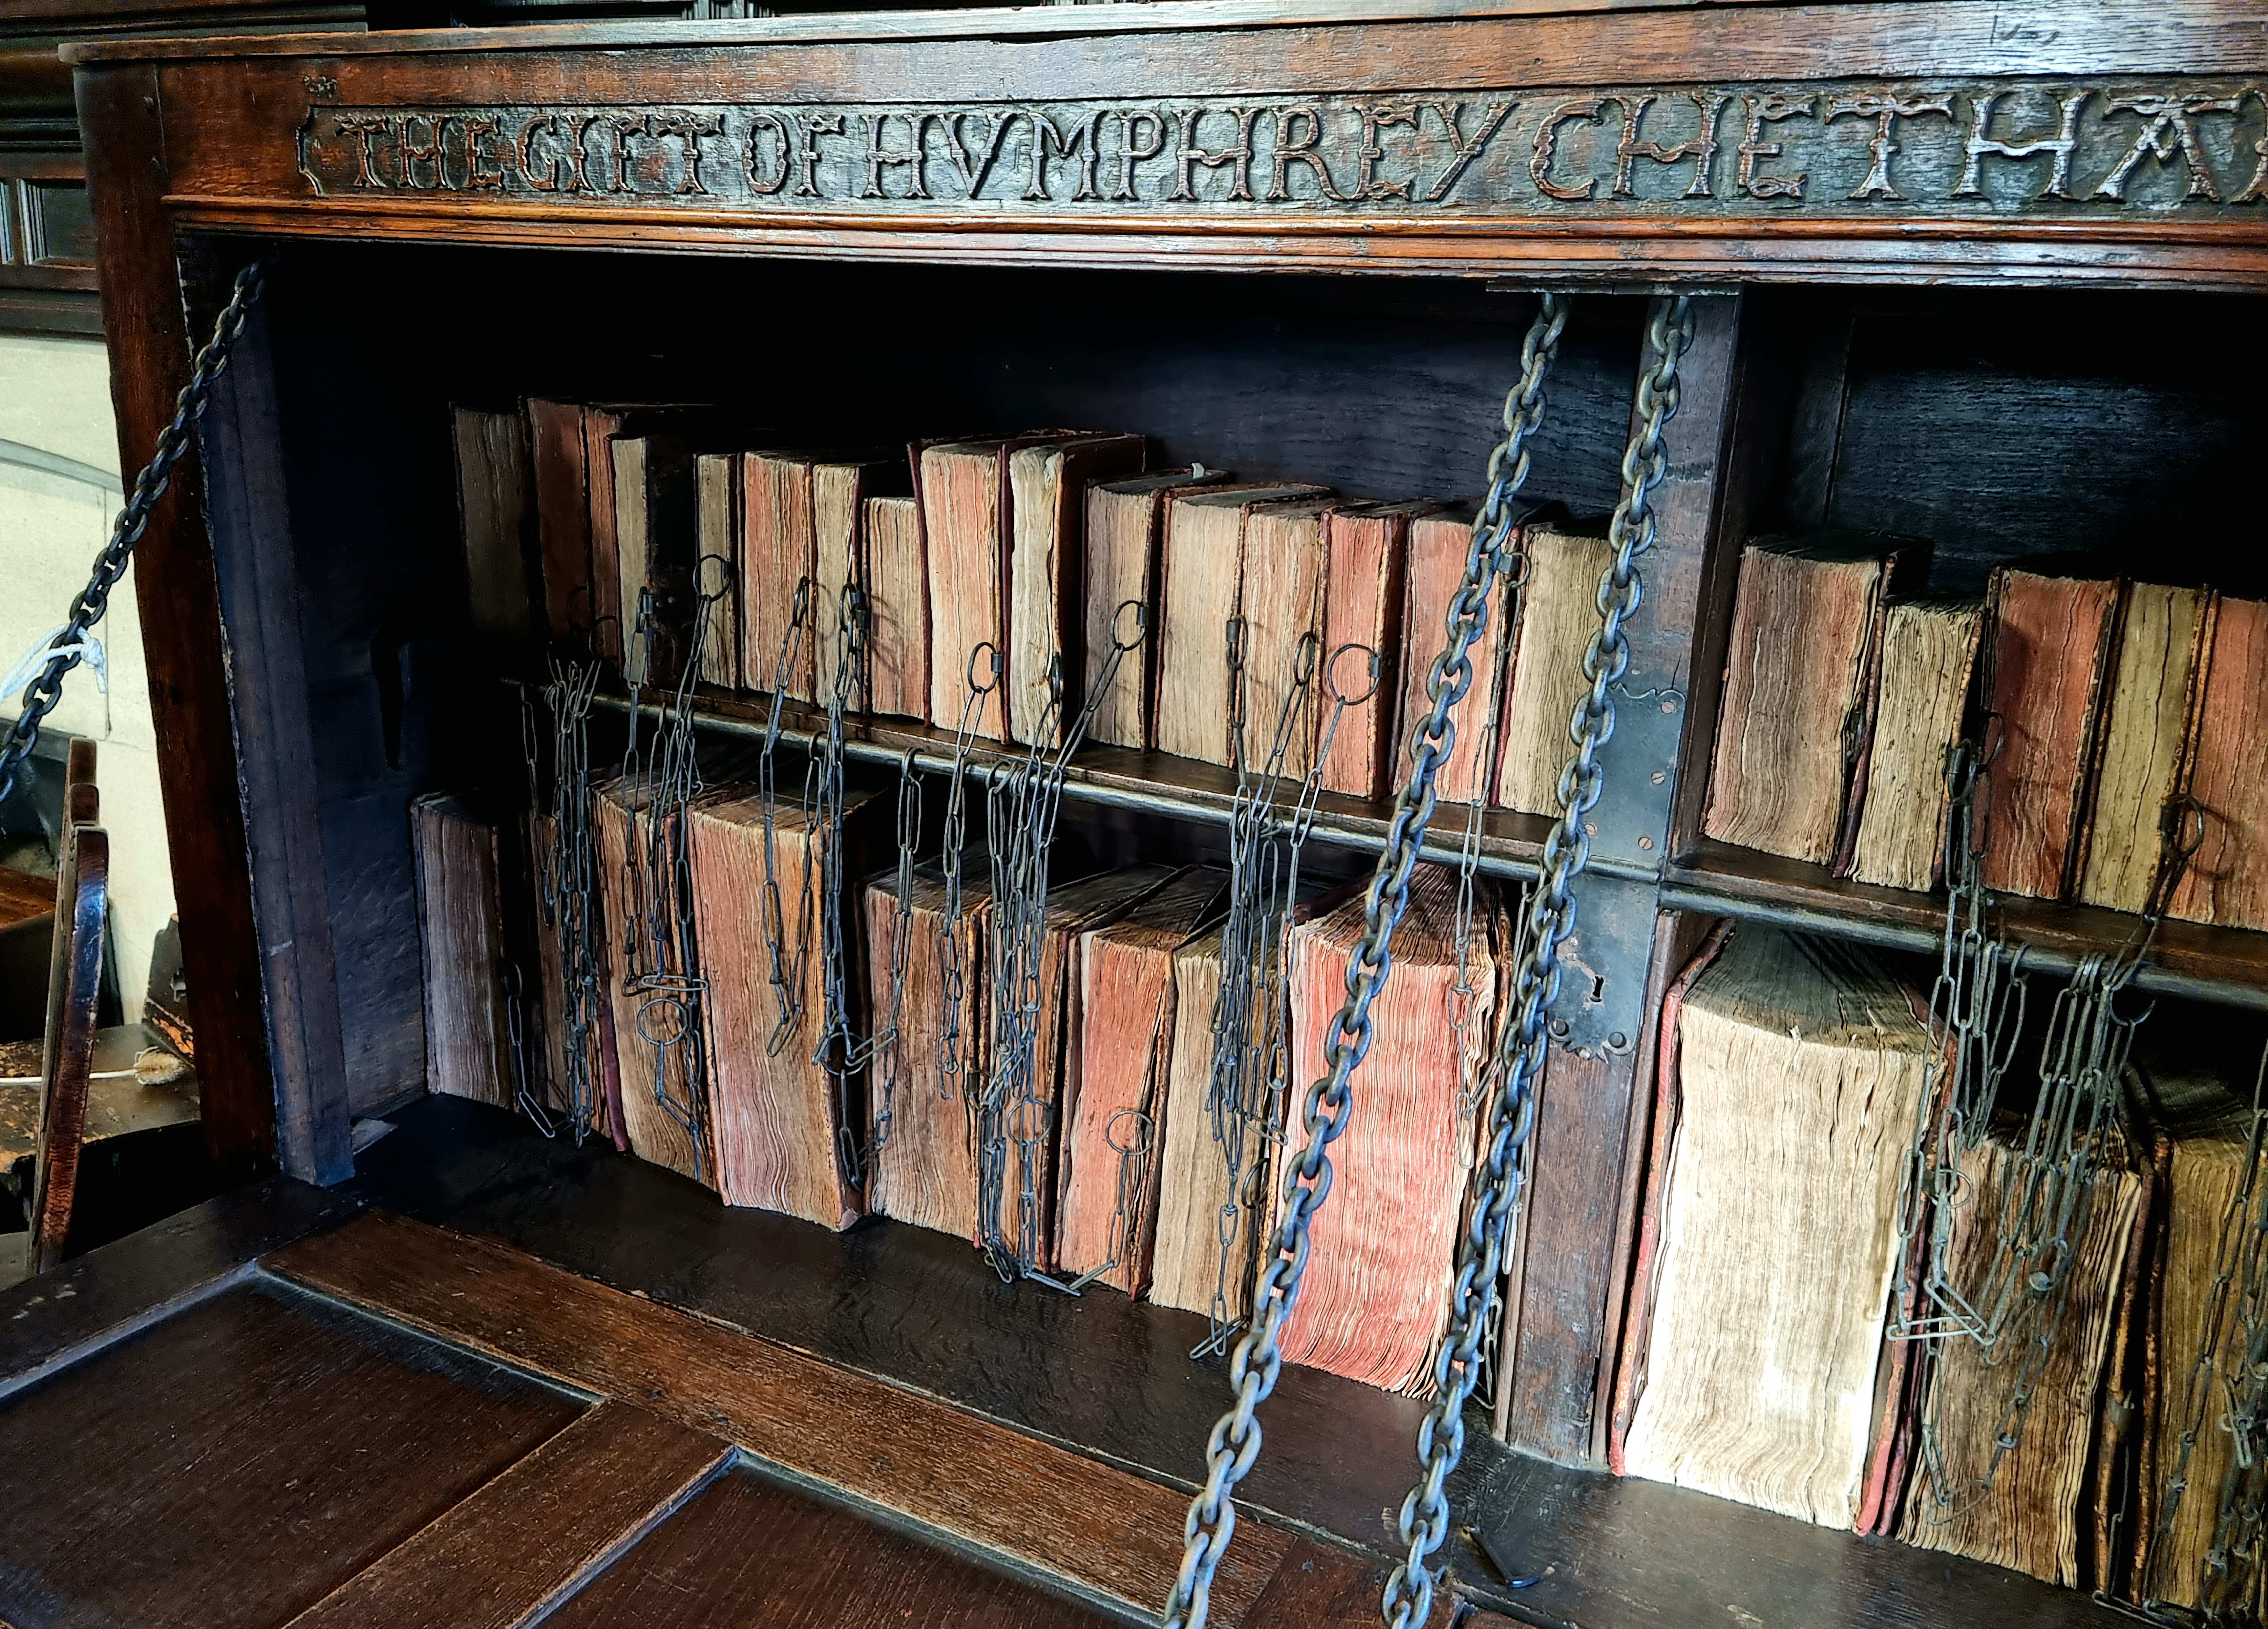 Chained parish library, Chetham's Library